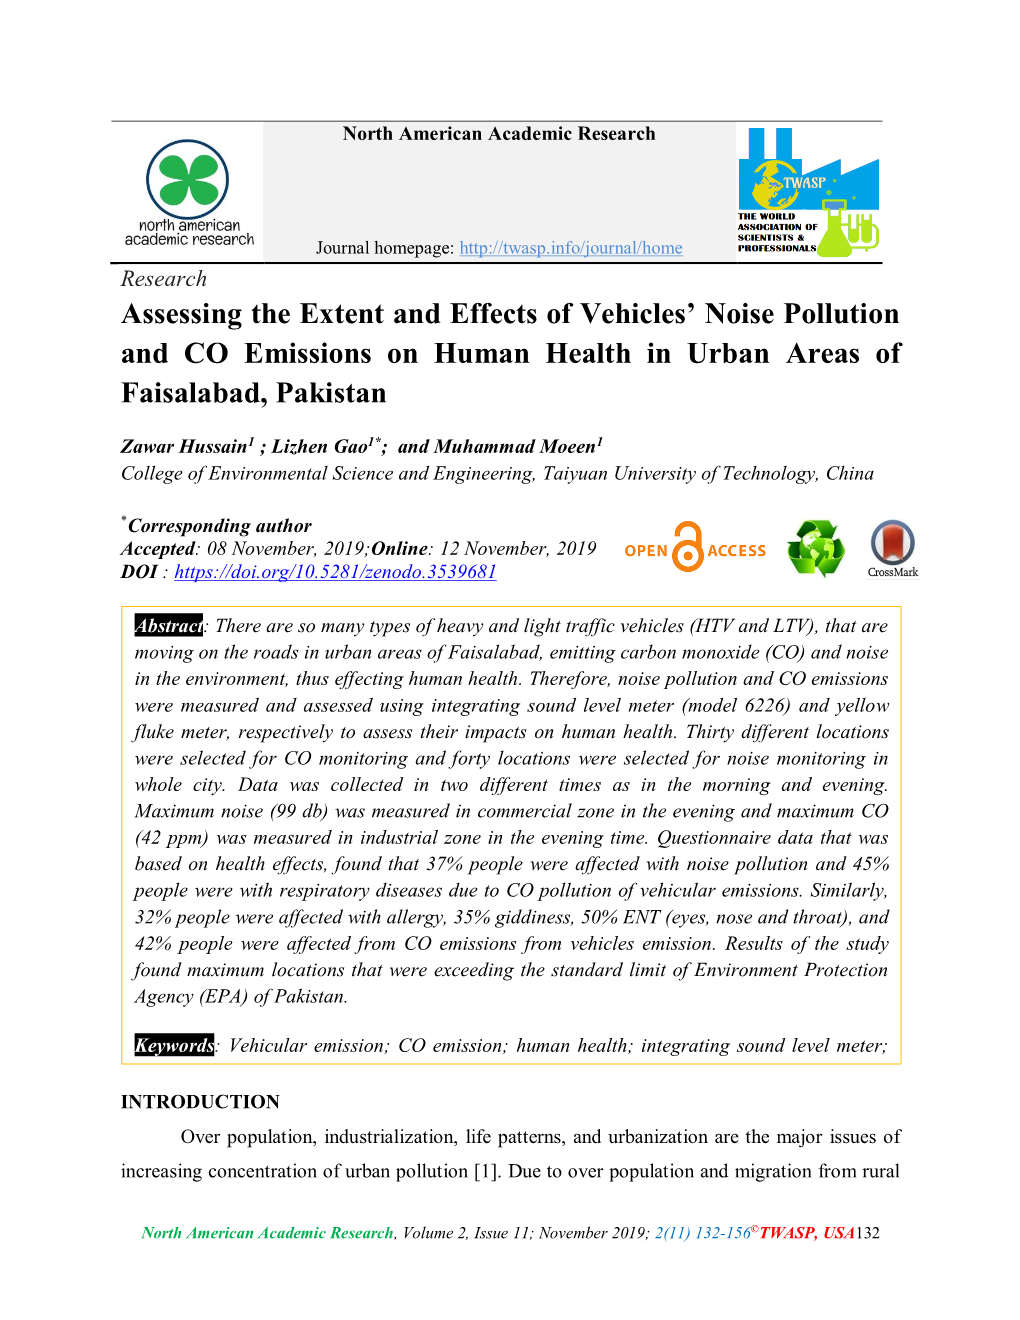 Assessing the Extent and Effects of Vehicles' Noise Pollution and CO Emissions on Human Health in Urban Areas of Faisalabad, P